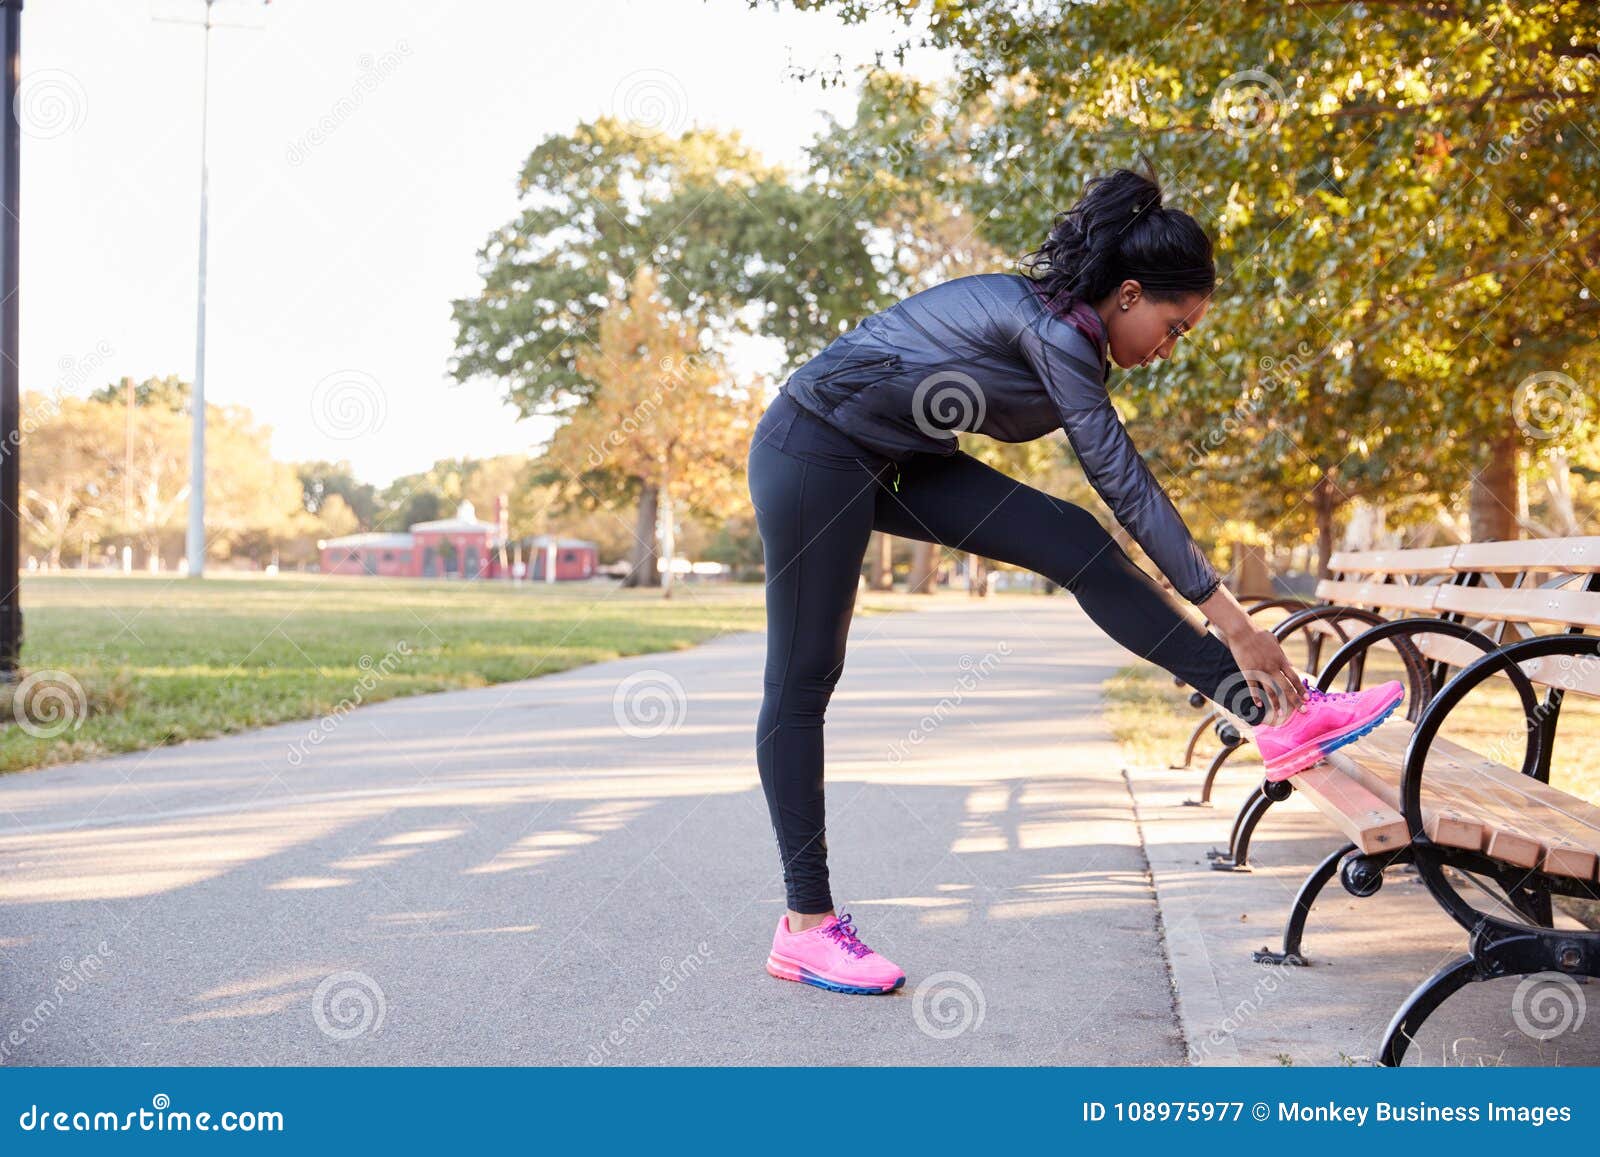 1,269 Woman Stretching Bench Stock Photos - Free & Royalty-Free